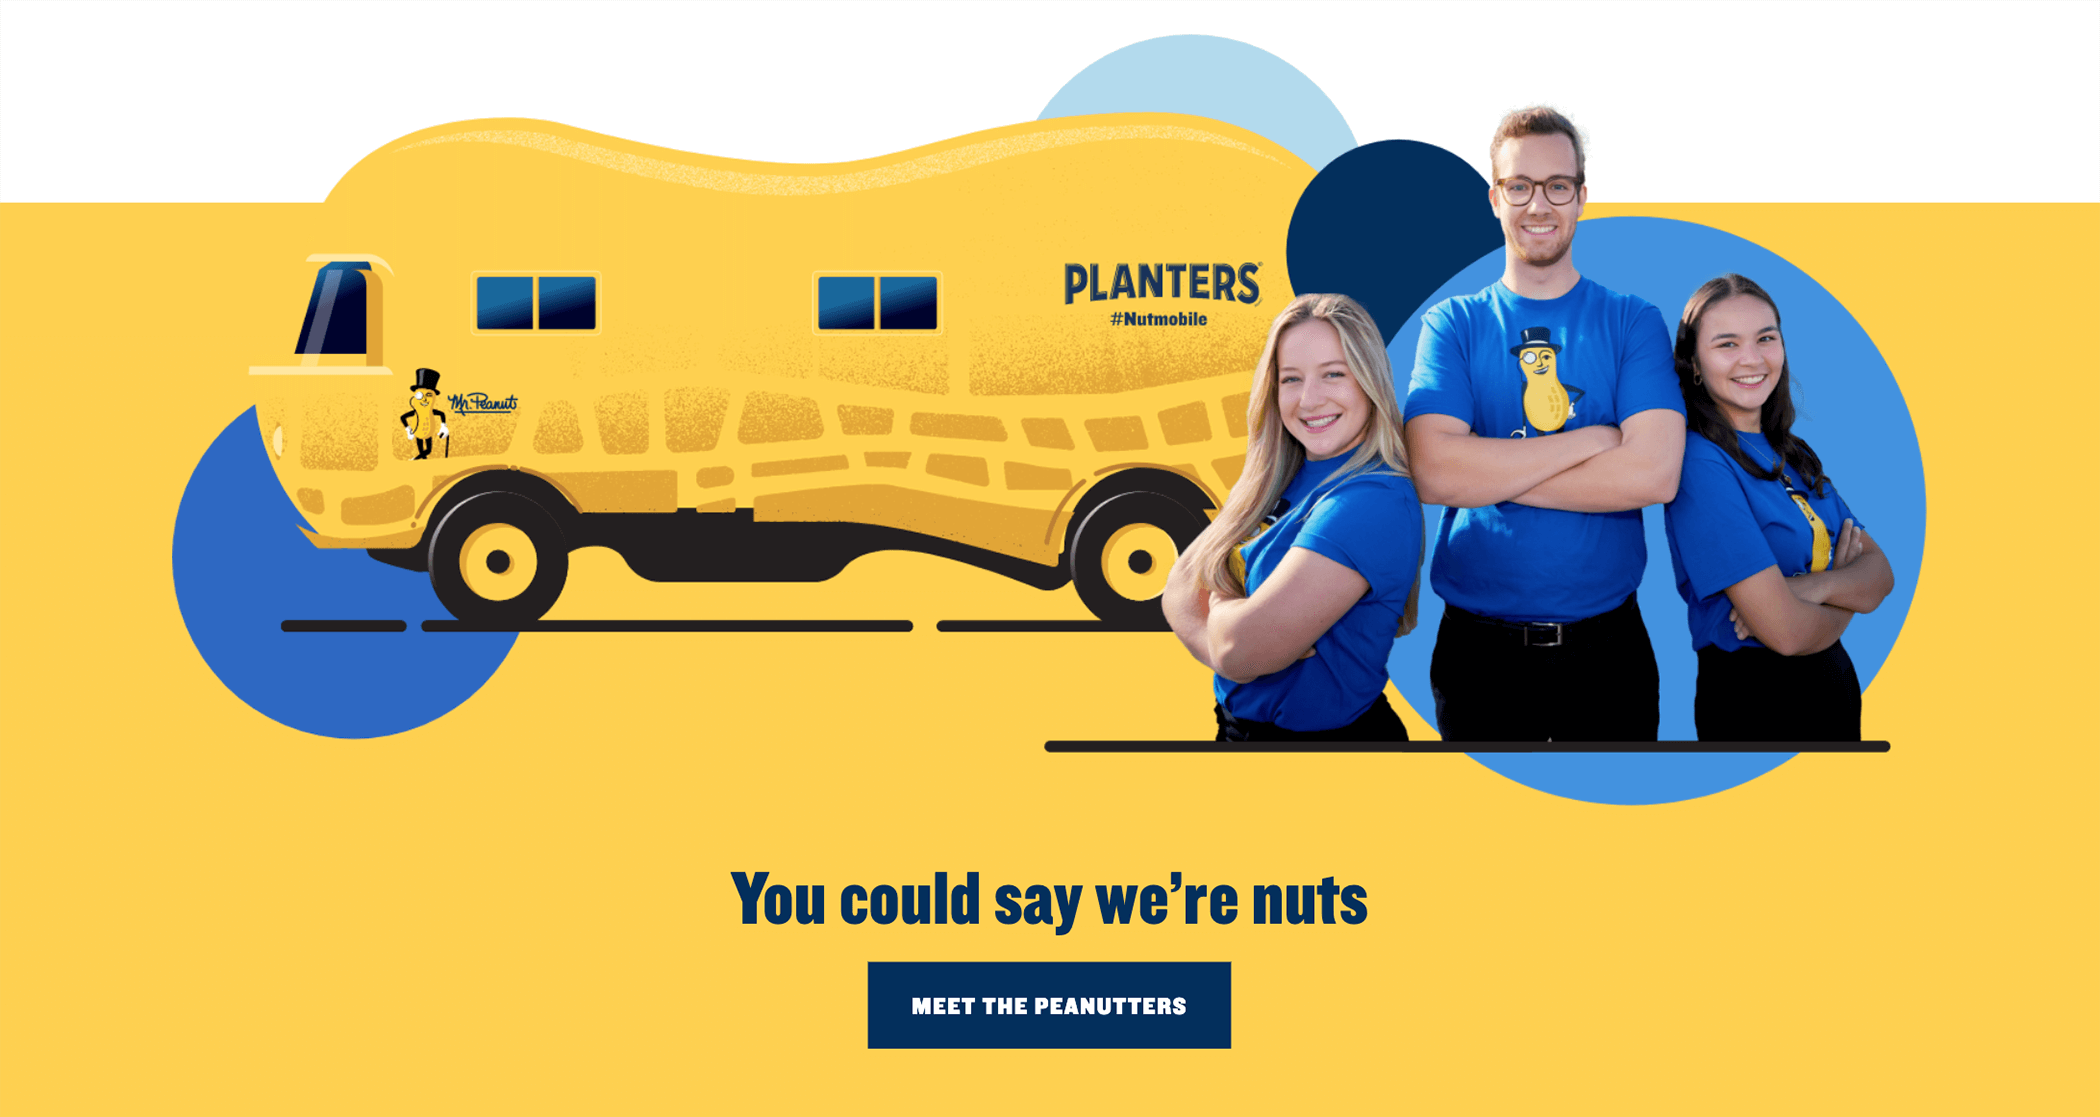 and illustration/graphic of the peanutters posing in front of the Nutmobile